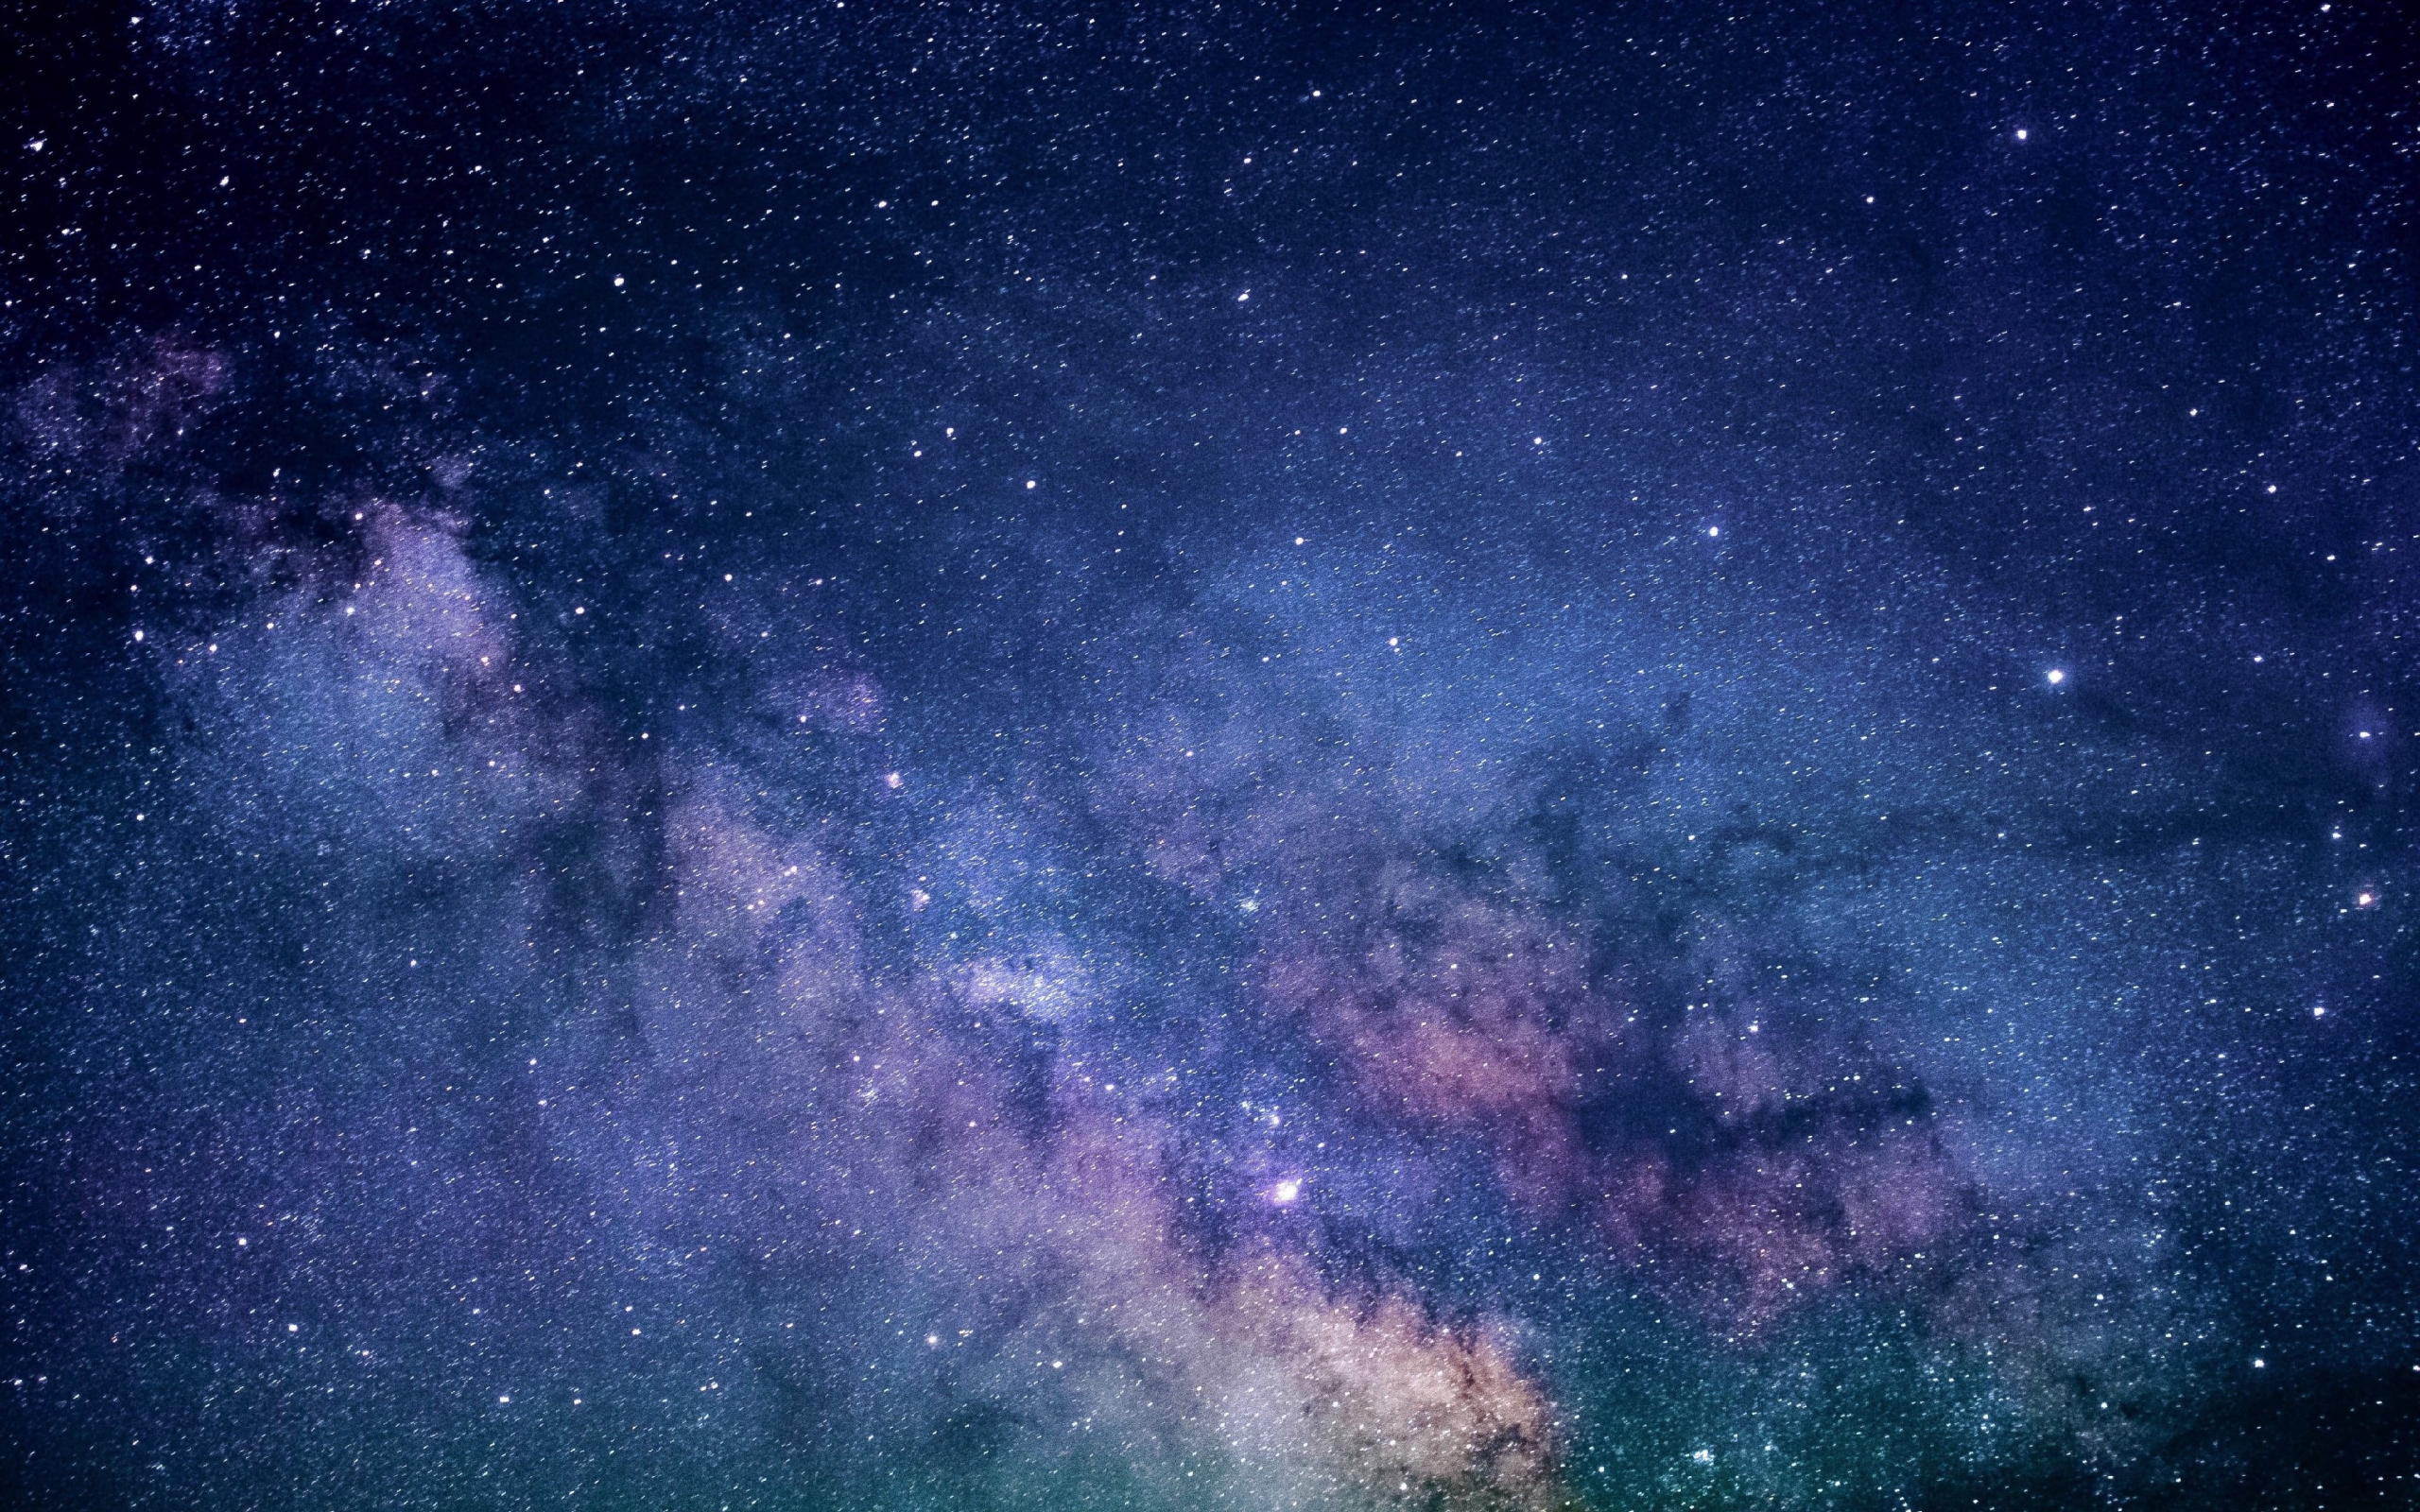 Download 2560x1600 Wallpaper Galaxy Milky Way Space Stars Dual Wide Widescreen 16 10 Widescreen 2560x1600 Hd Image Background 2455